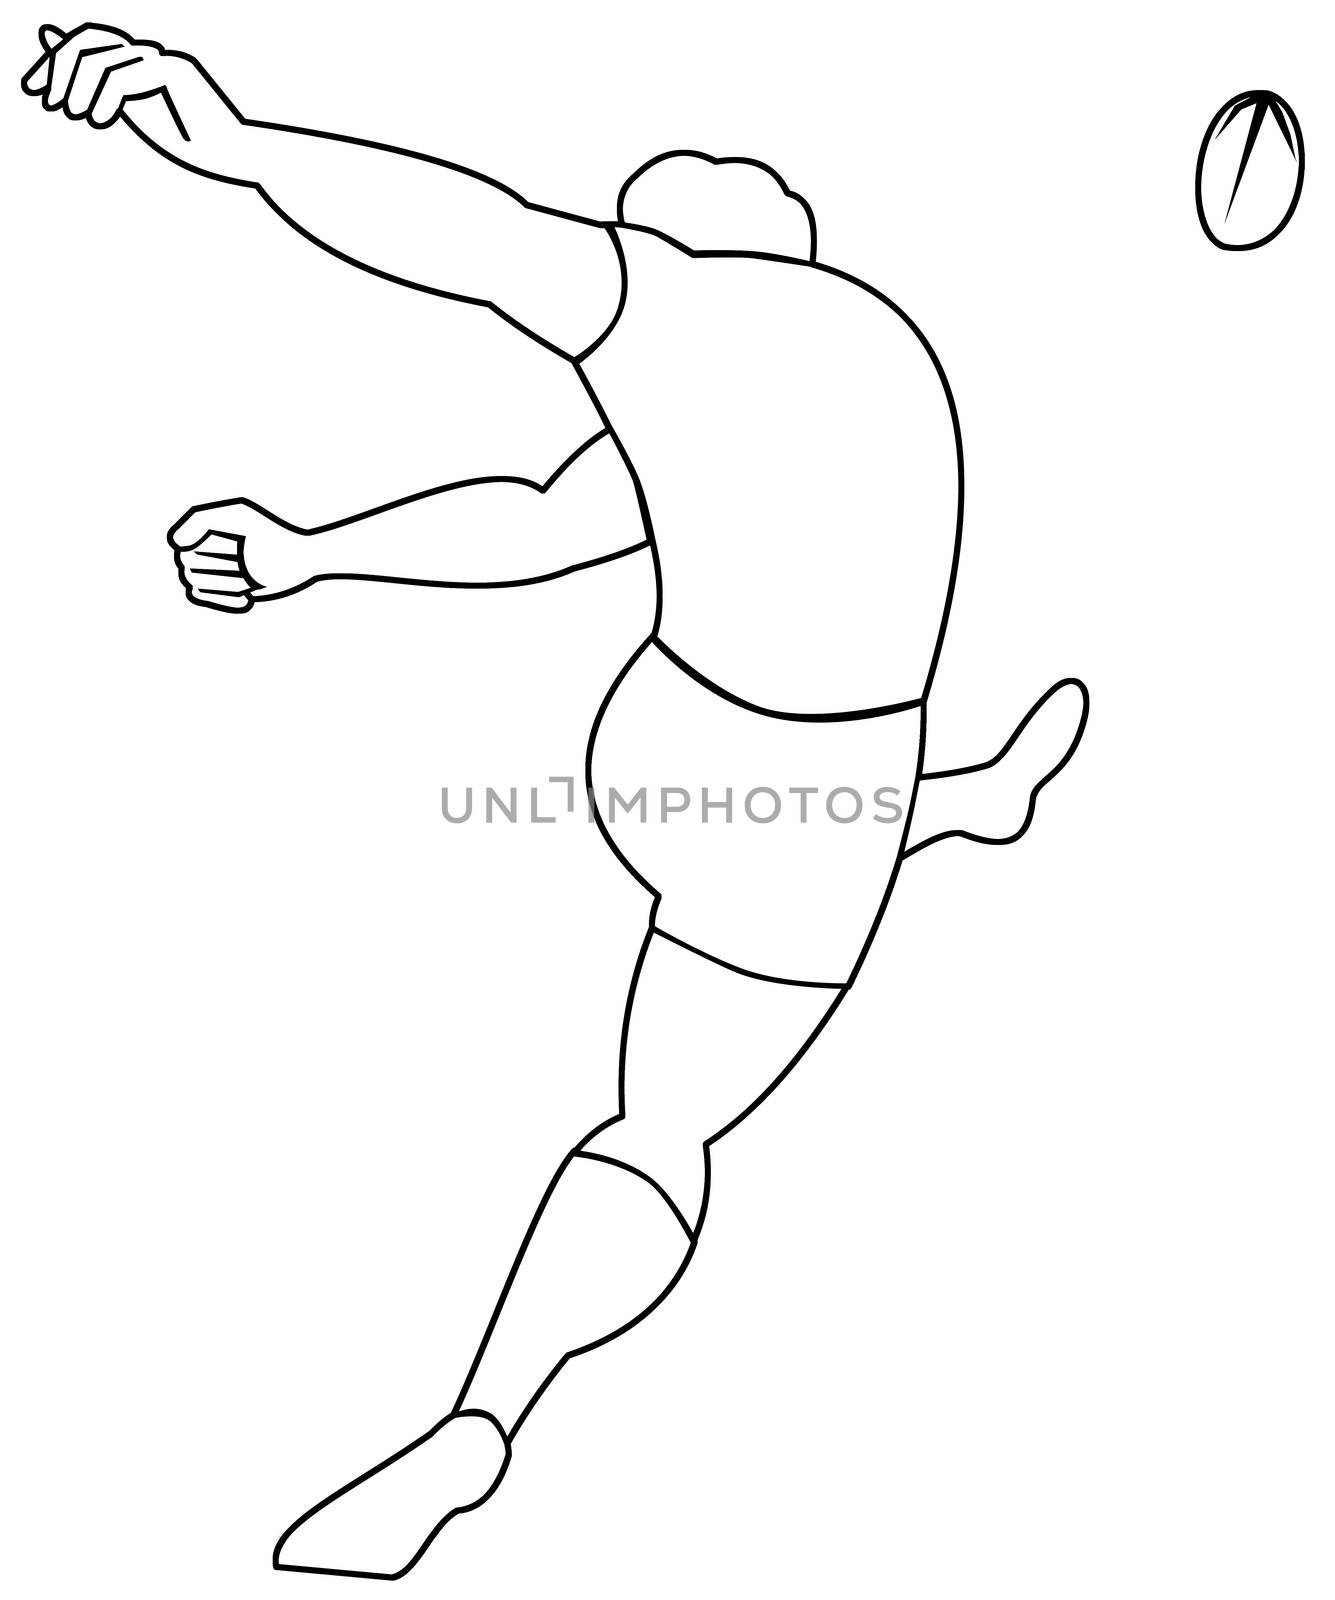 illustration of a Rugby player kicking ball viewed from rear done in black and white